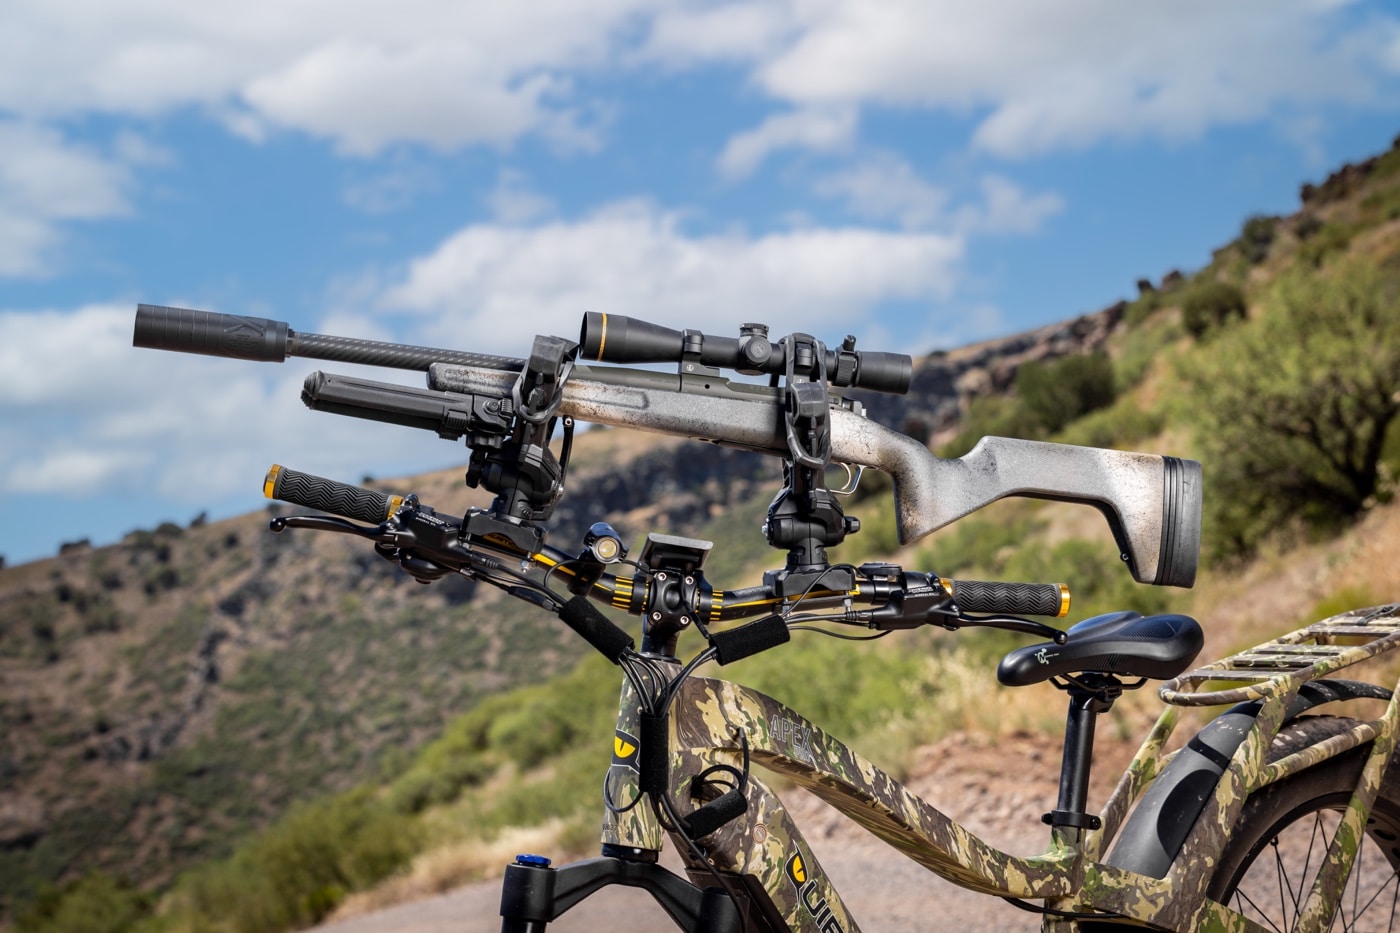 hunting rifle with scope suppressor stock mounted on apex pro e-bike